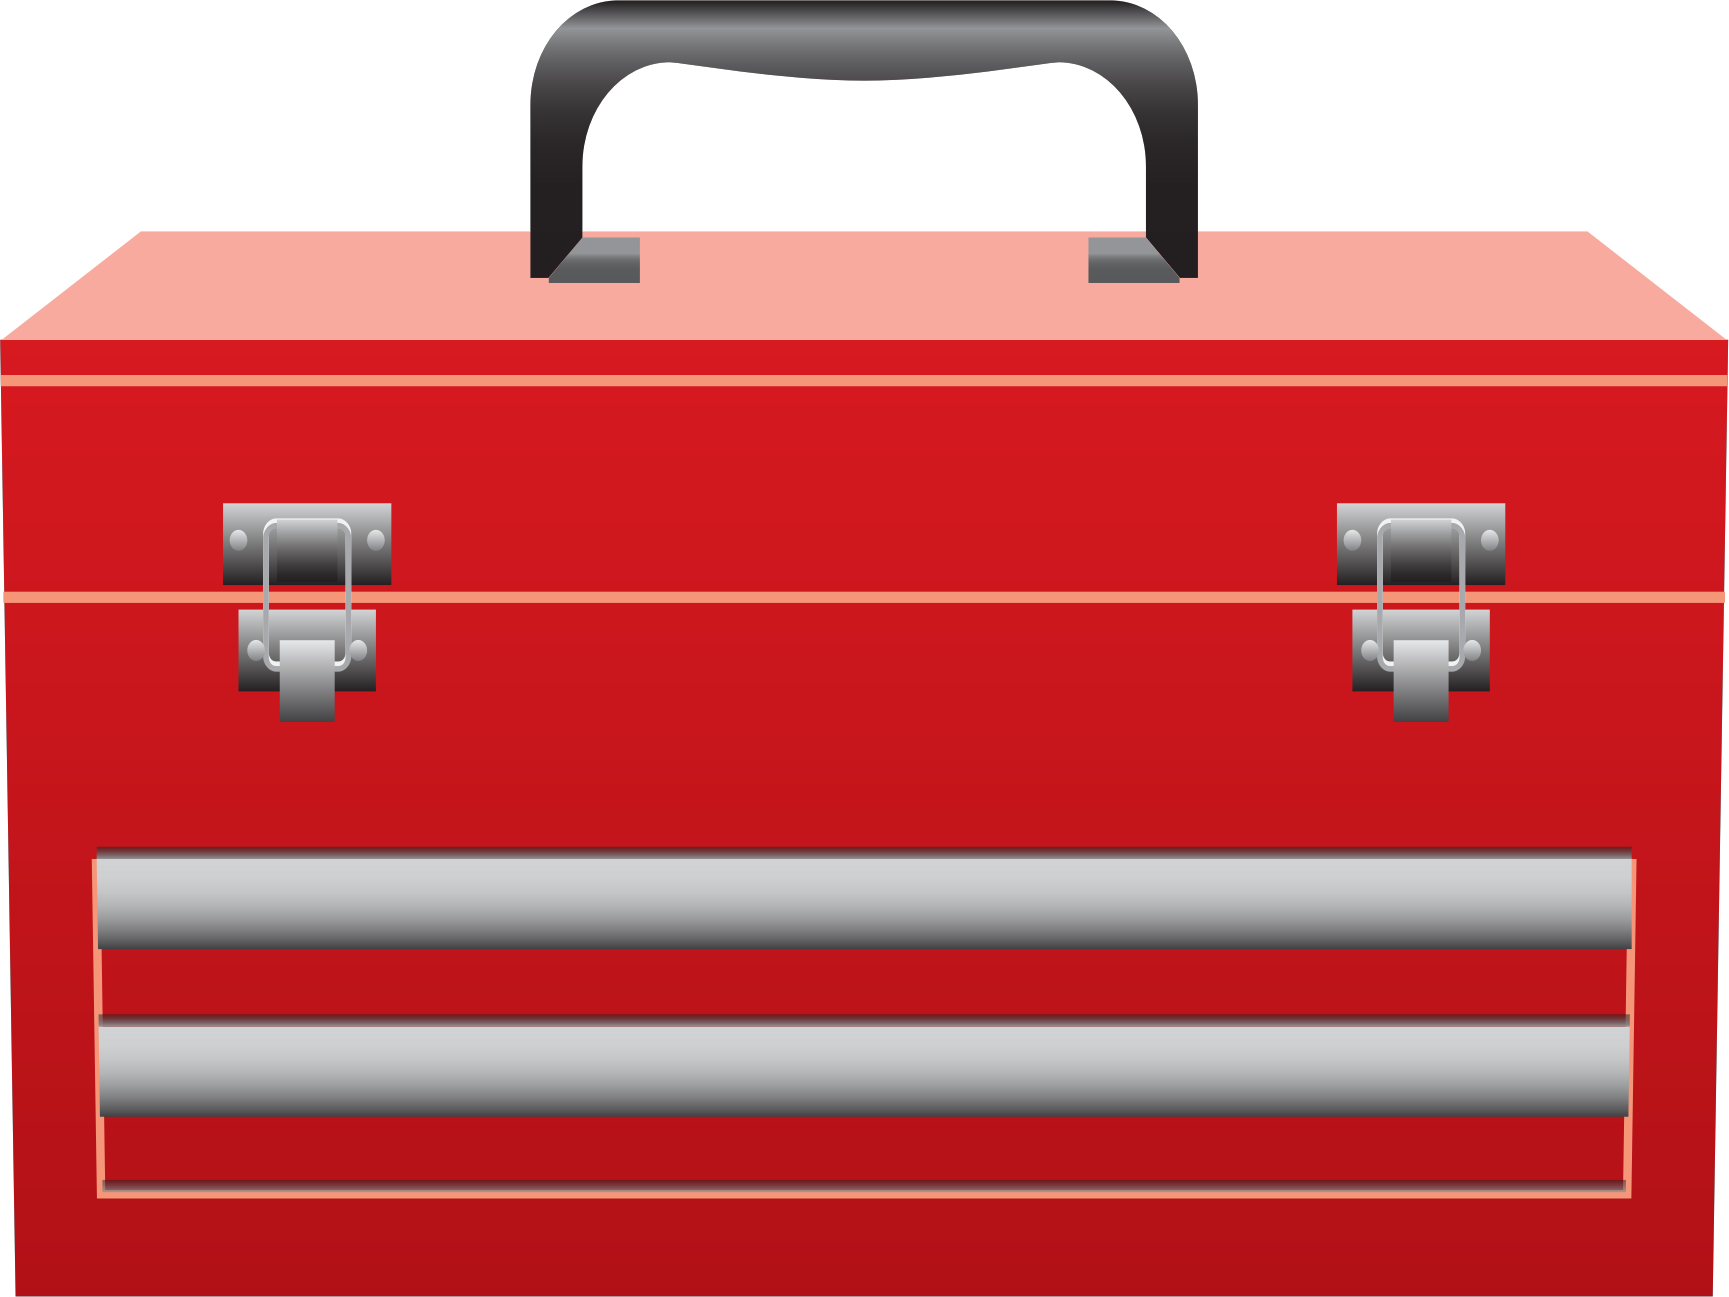 Toolbox clipart red tool